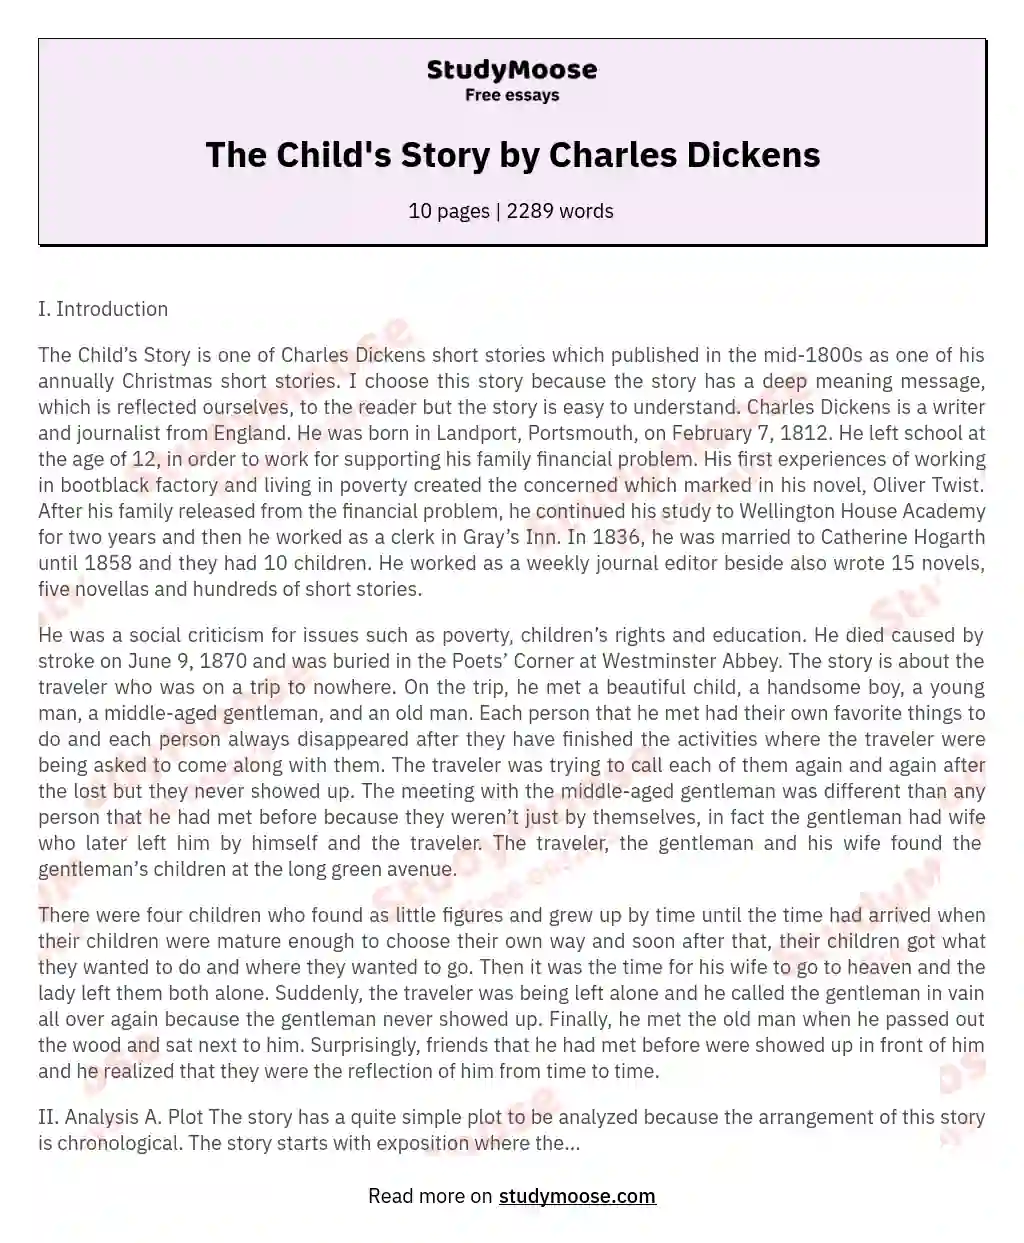 The Child's Story by Charles Dickens essay